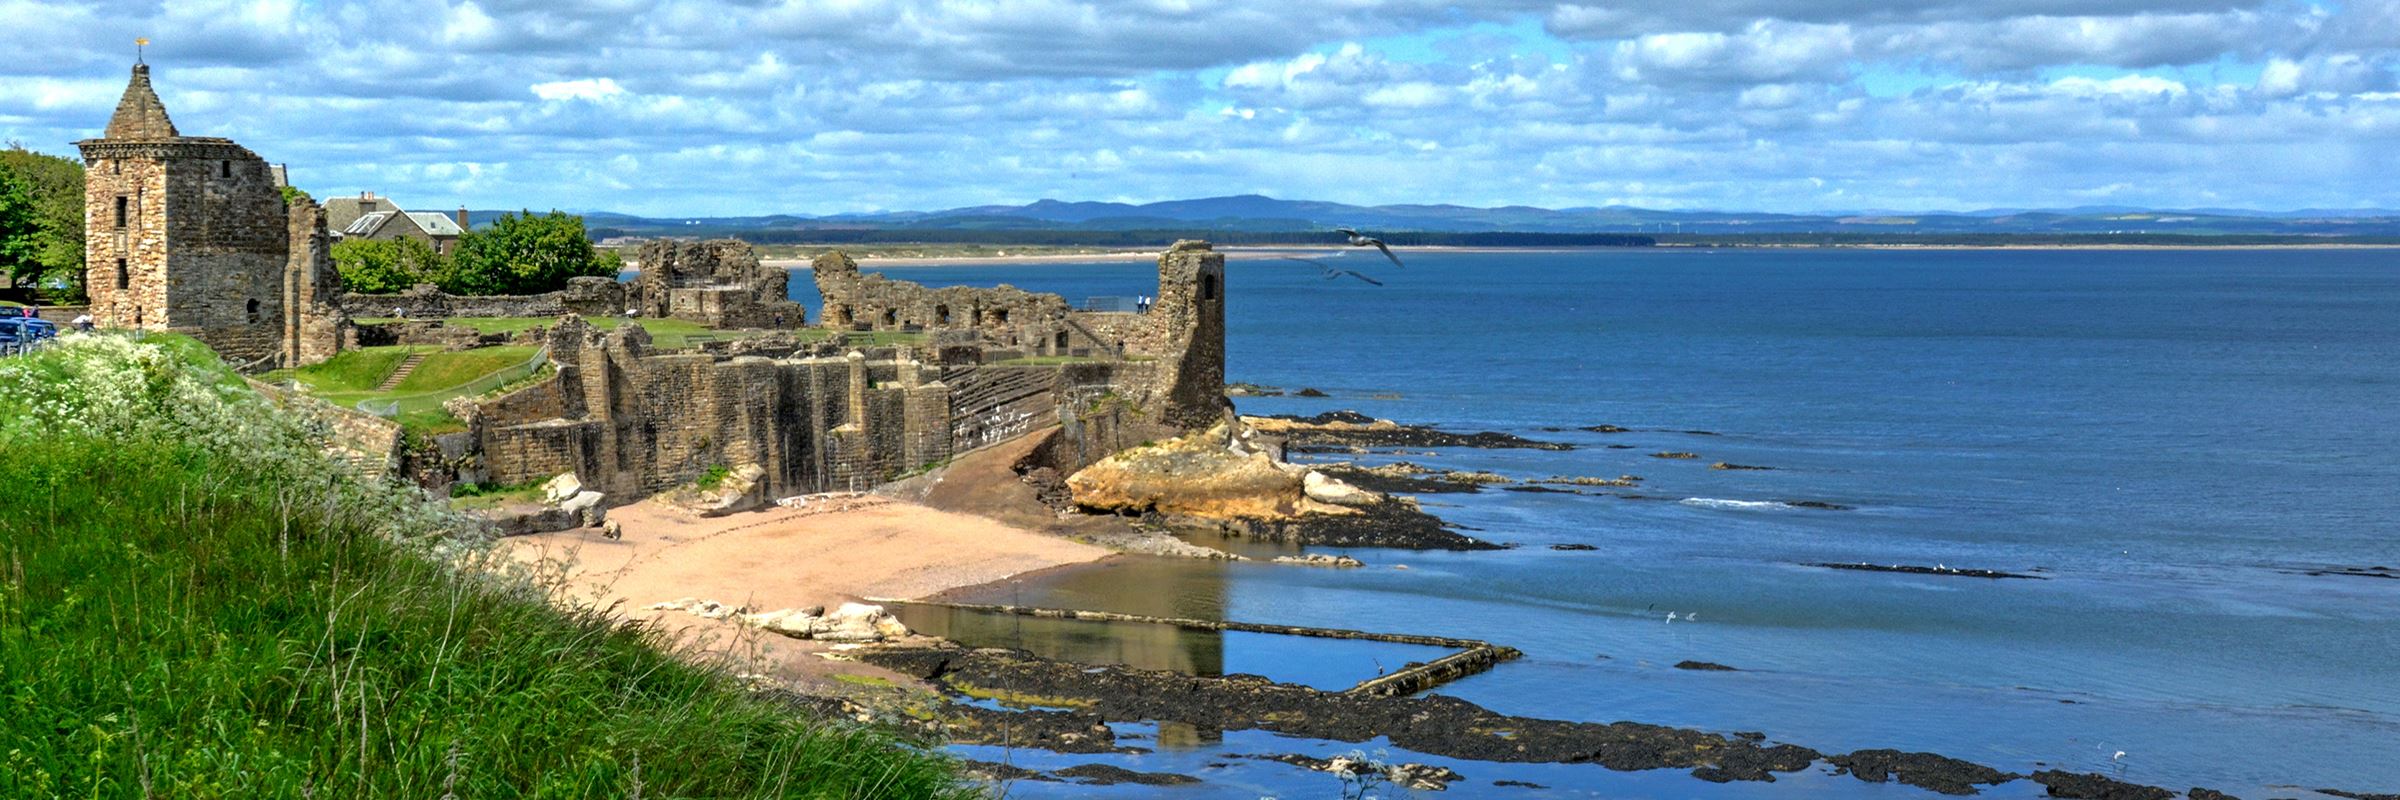 Walking tour of St Andrews | Audley Travel CA